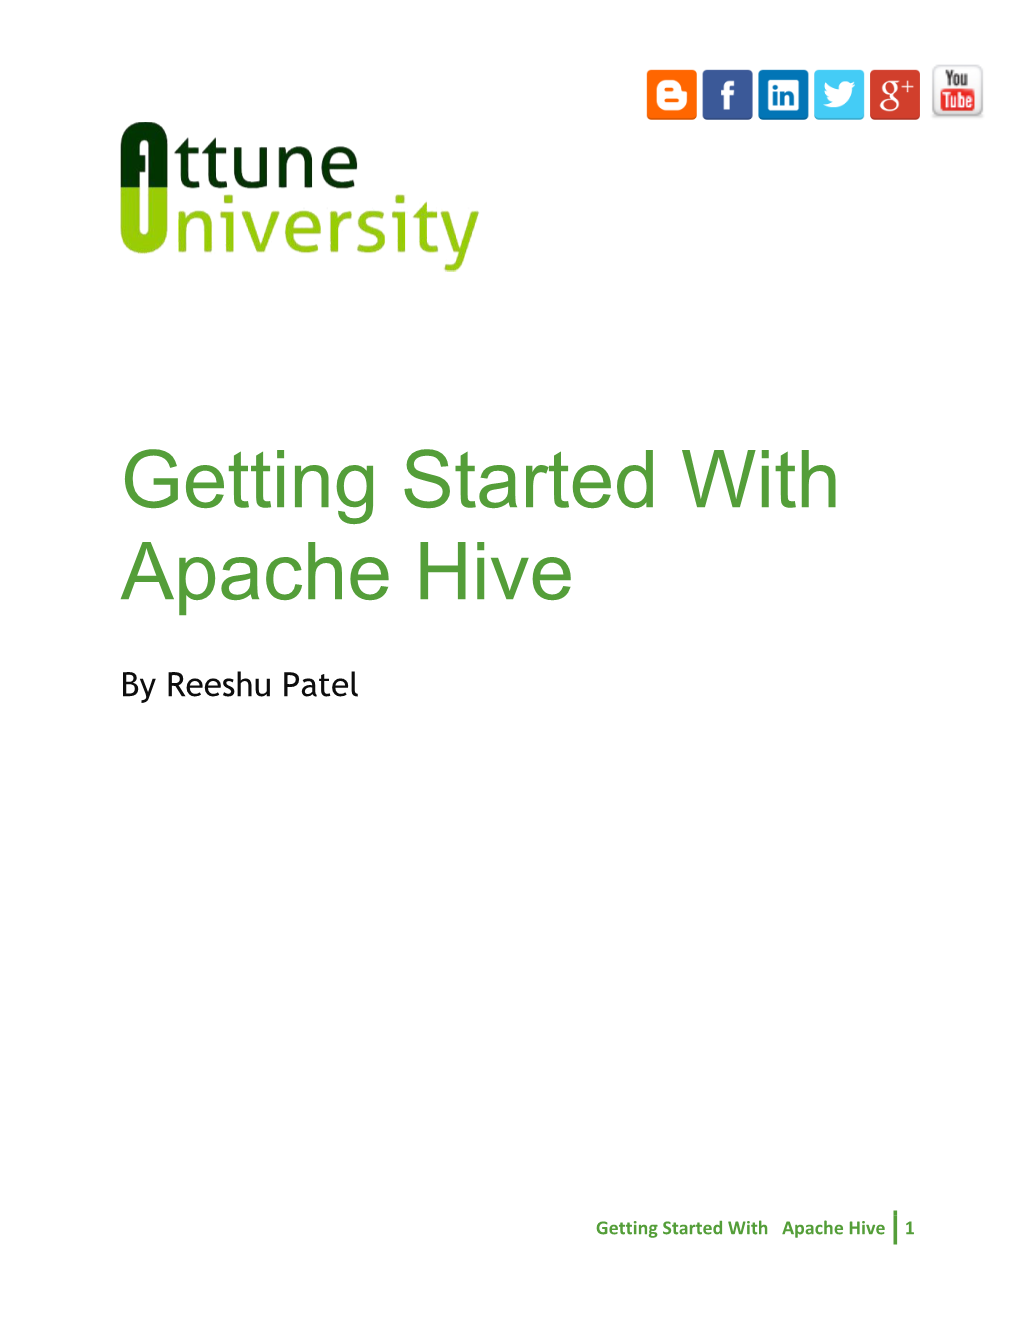 Getting Started with Apache Hive